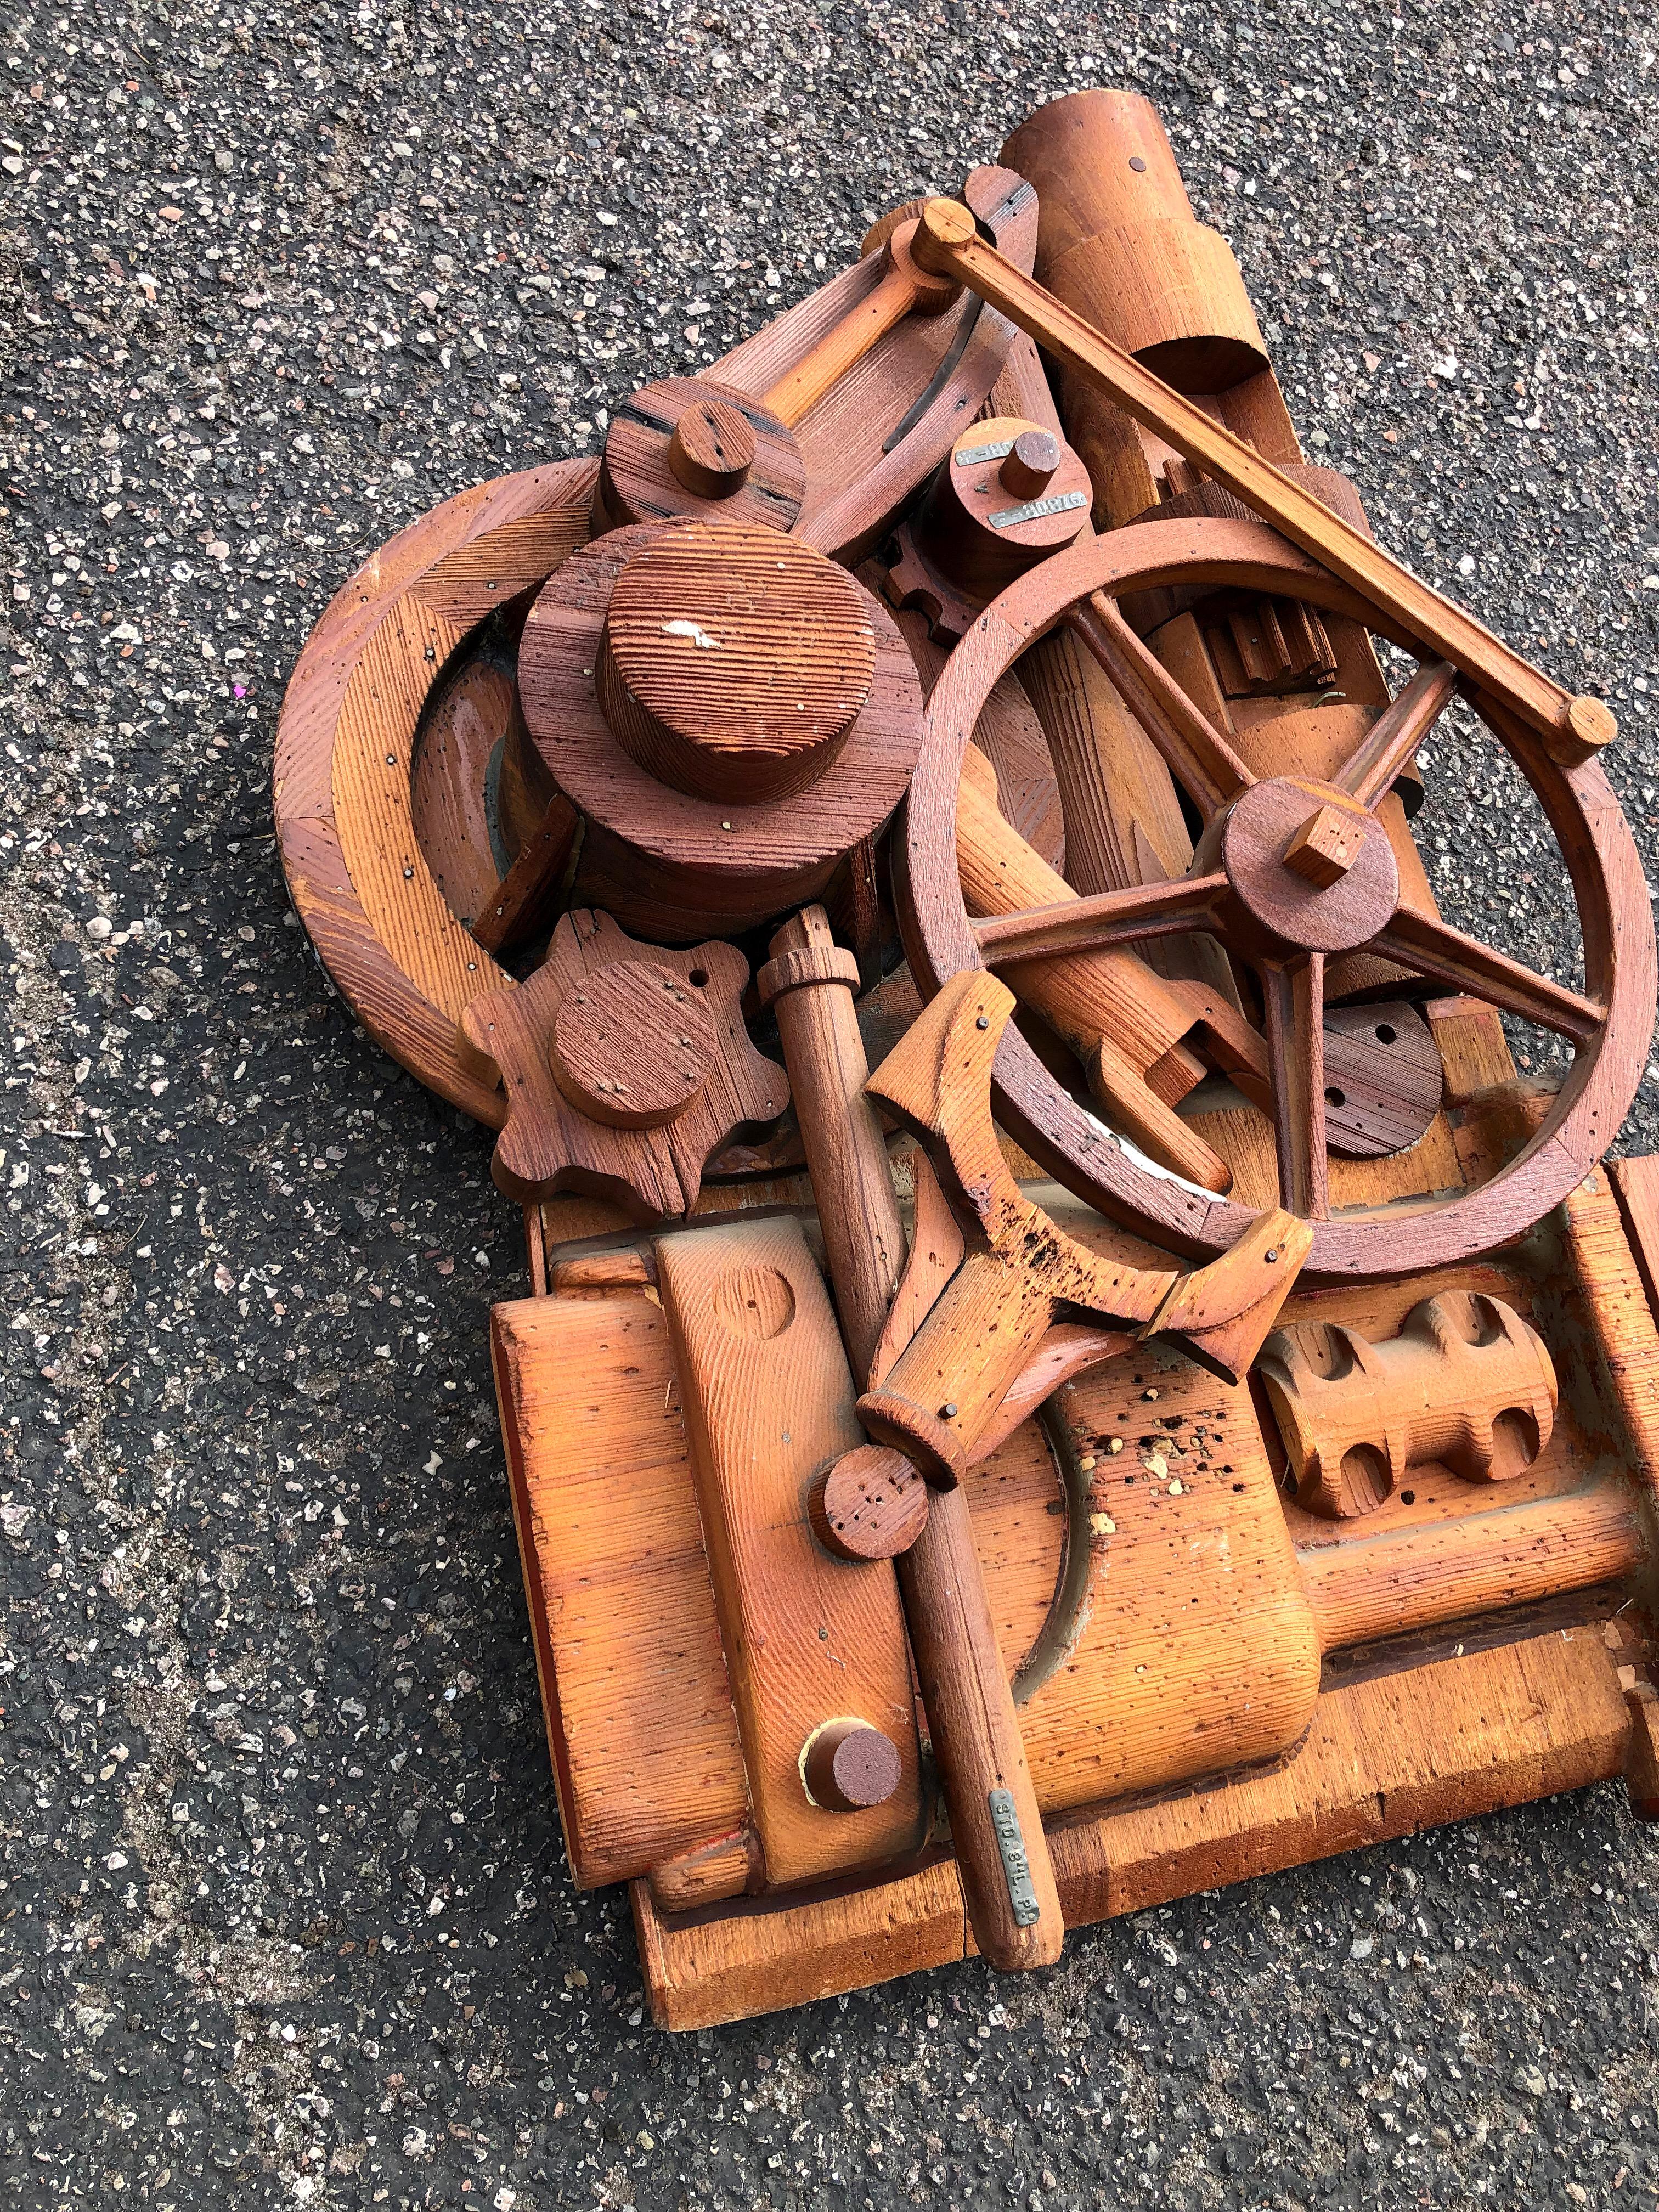 Industrial carved wood sculptural display, with fantastic 3D details. Handcarved with what appears to be reclaimed wood, this piece depicts an assortment of machinery parts, almost like an engine, with cogs, wheels and turnstiles. Rich wood tones in